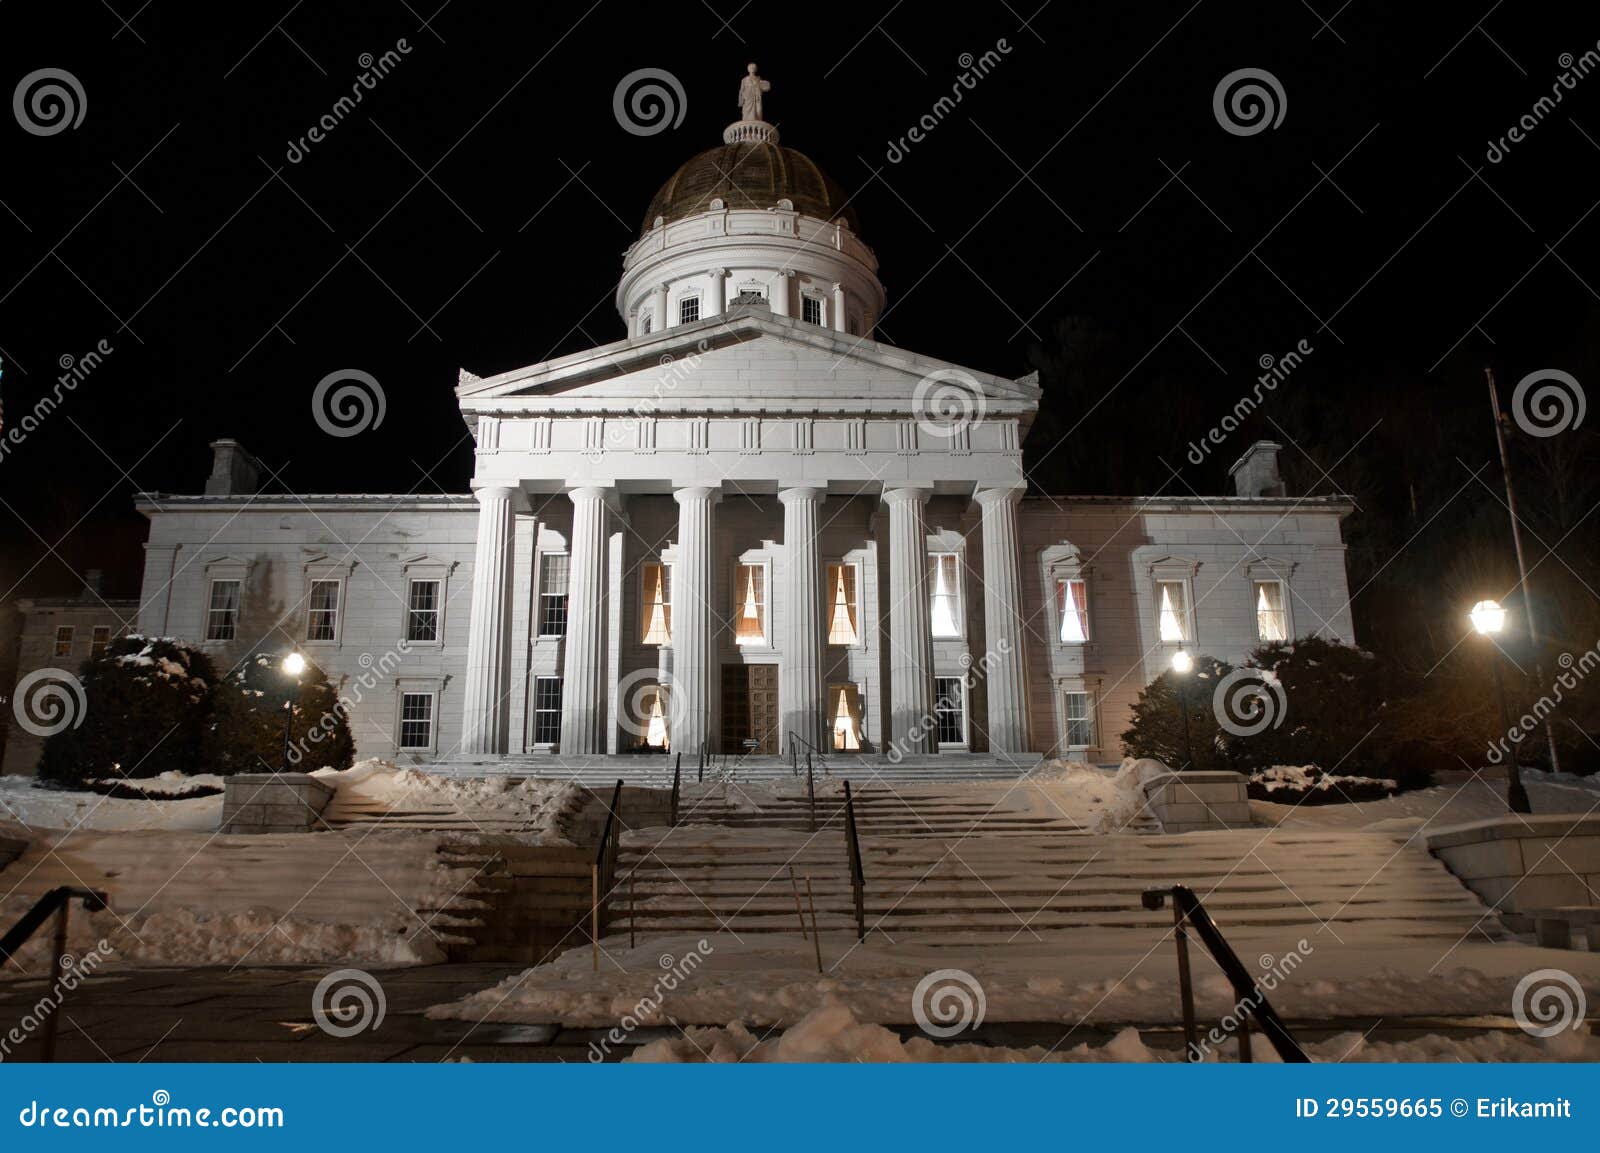 vermont statehouse at night in winter